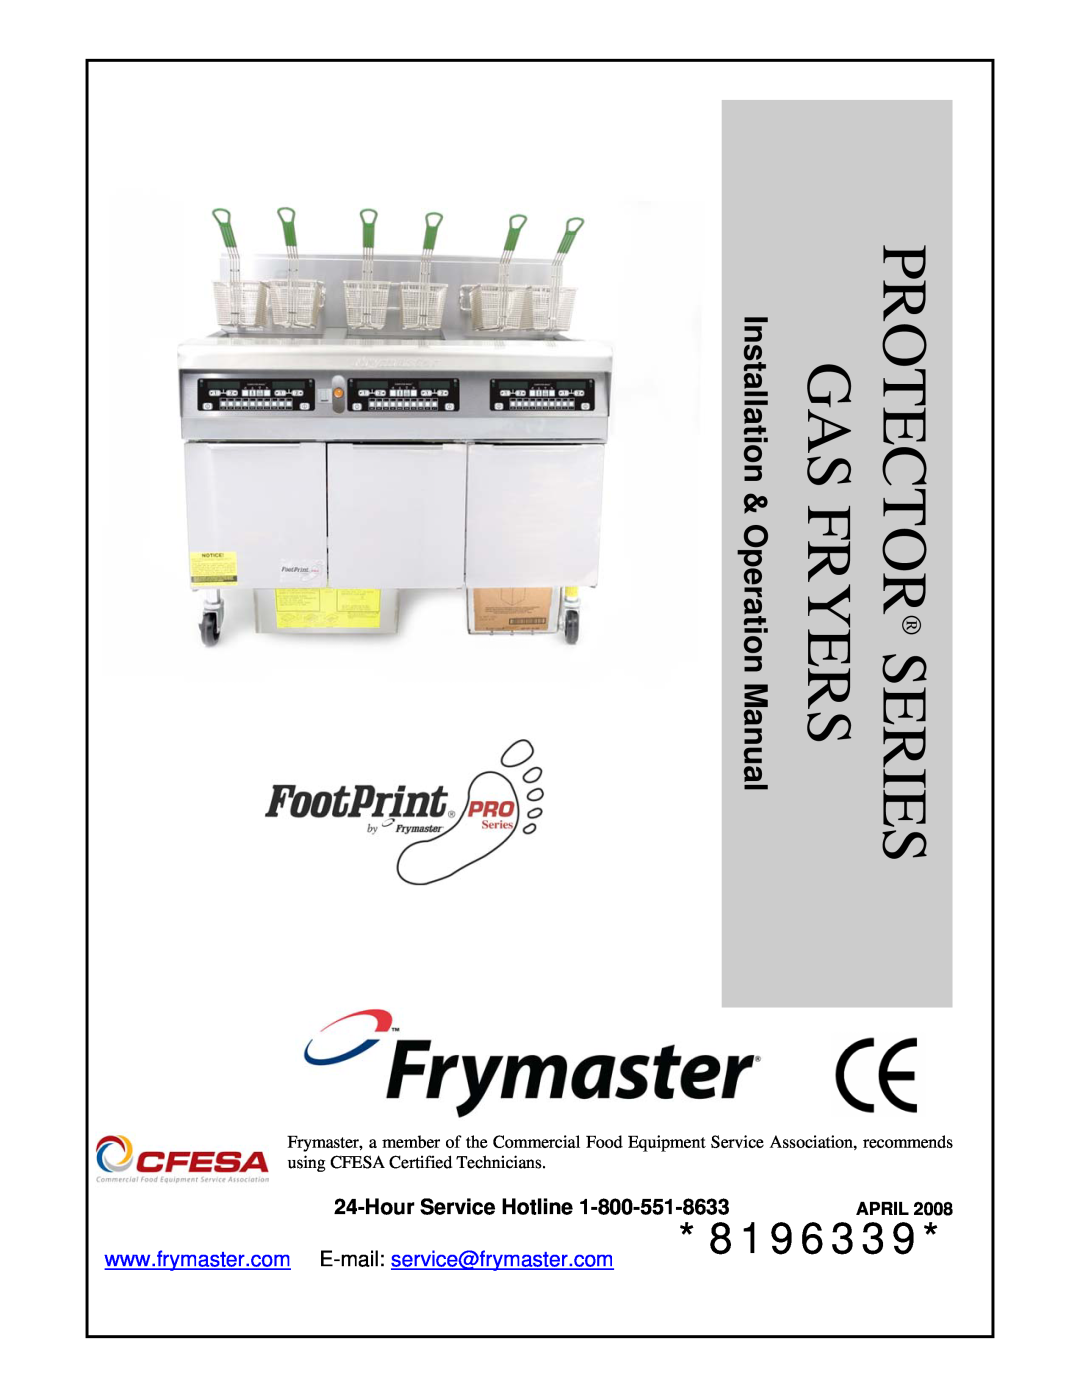 Frymaster operation manual HourService Hotline, Protector Series Gas Fryers, 8196339, April 